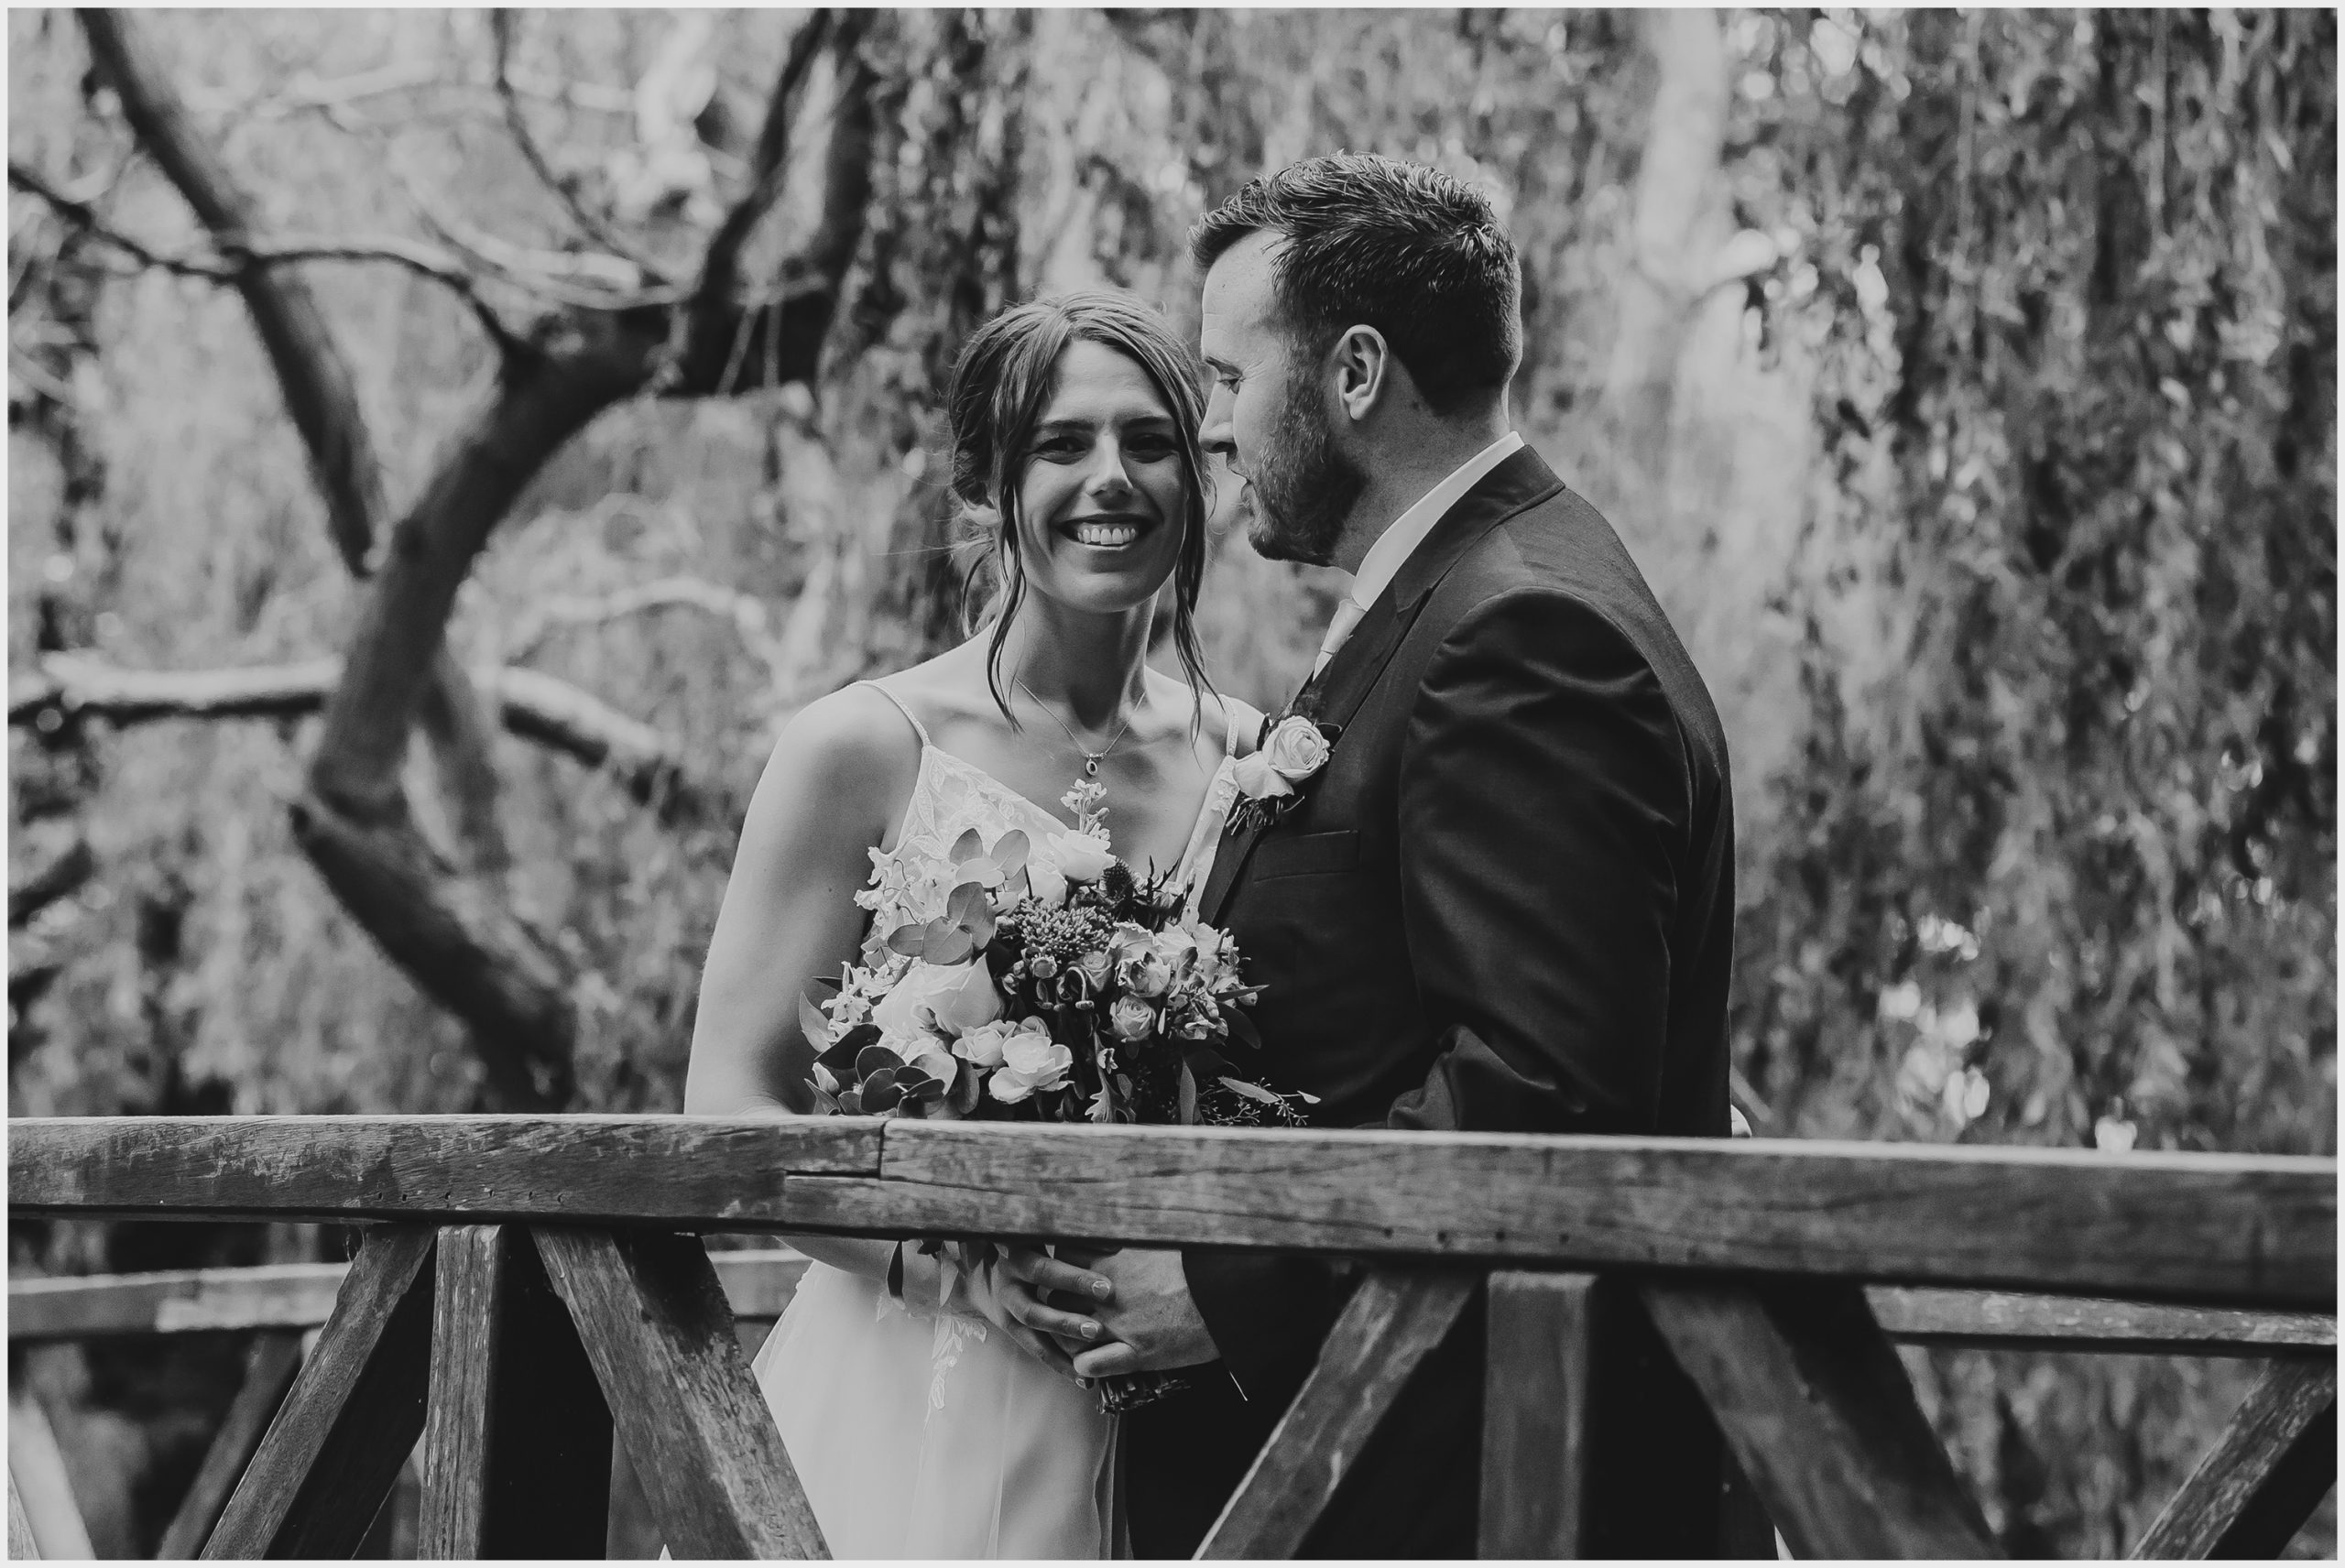 A beaming bride looks at the camera while being hugged by her husband during their couples photoshoot at The Grosvenor Pulford Hotel and Spa.  Image captured by Helena Jayne Photography a wedding photographer based in Chester